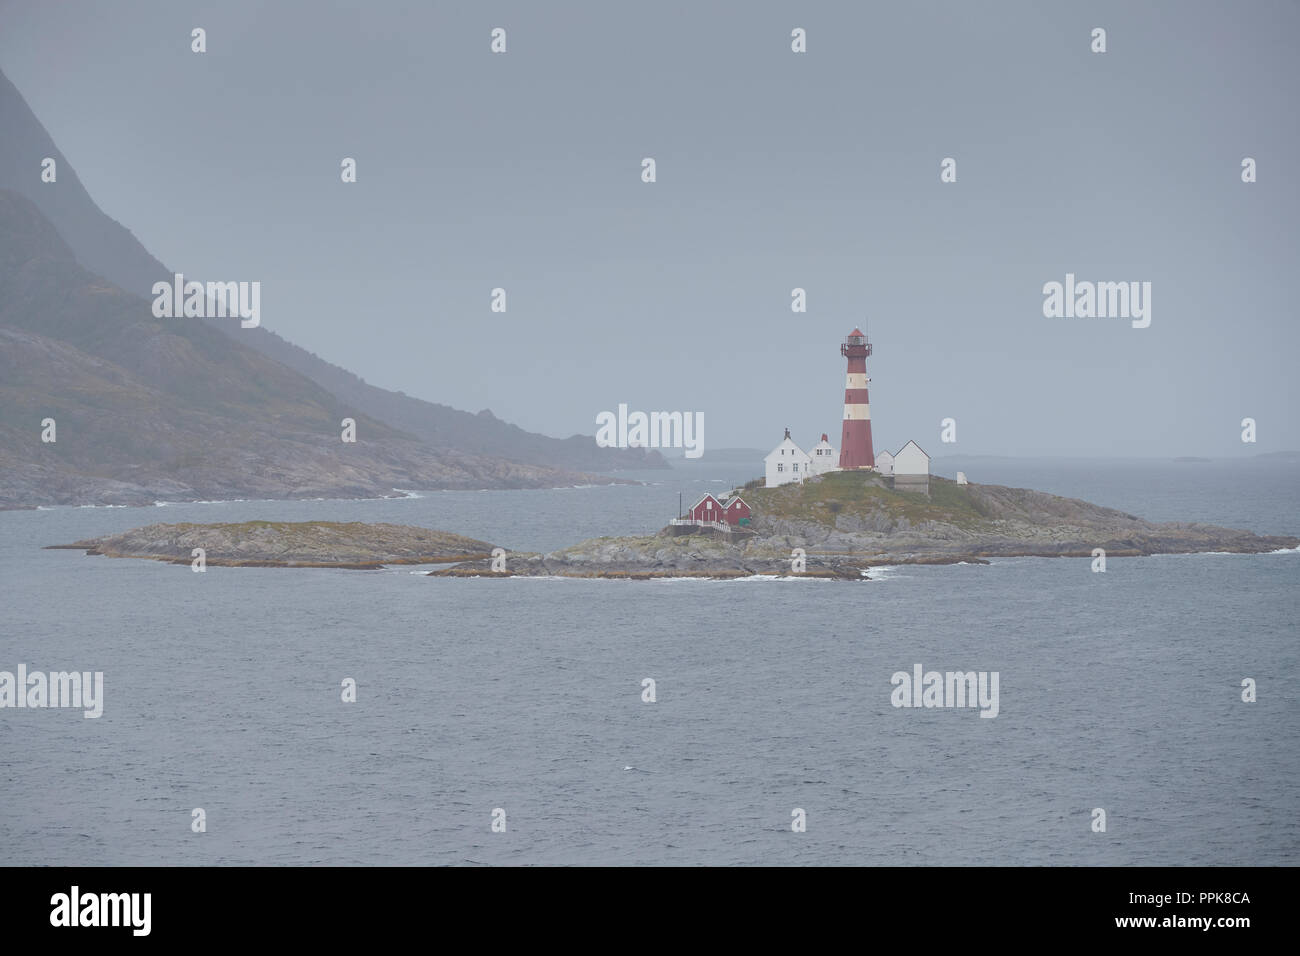 The Norwegian Landegode Lighthouse (Landegode Fyr), located on the small island of Eggløysa, About 100 Km North Of The Arctic Circle. Norway. Stock Photo